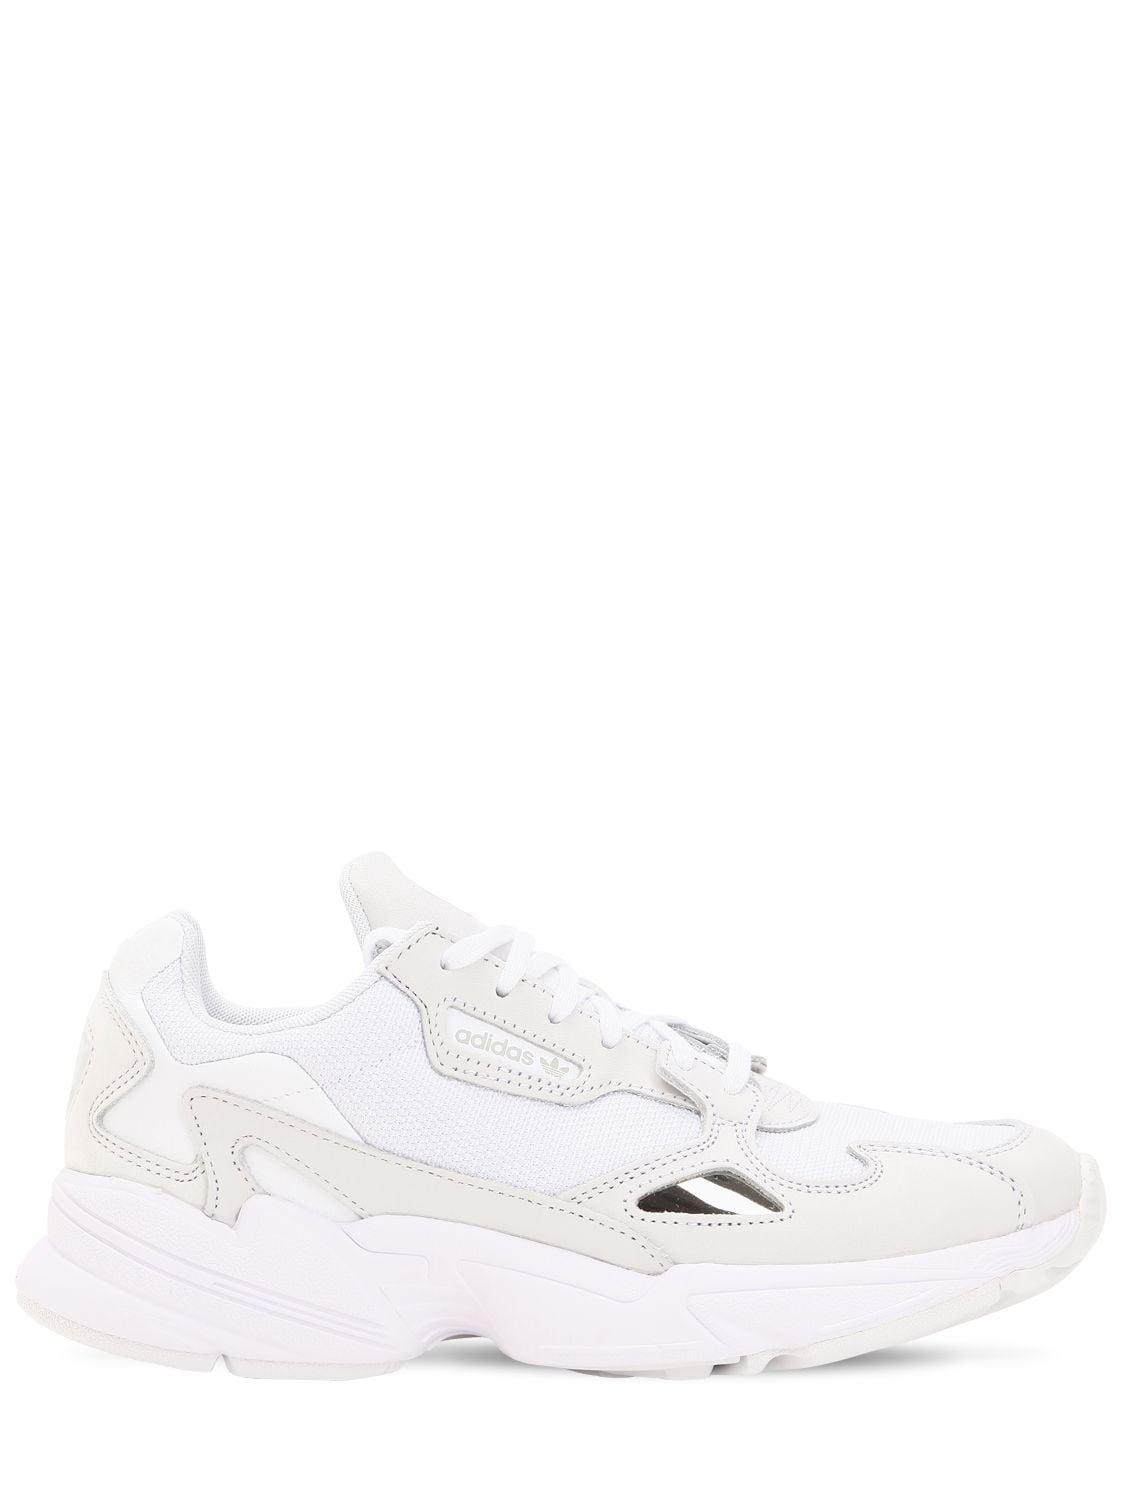 adidas Originals Falcon Mesh & Suede Sneakers in White | Lyst